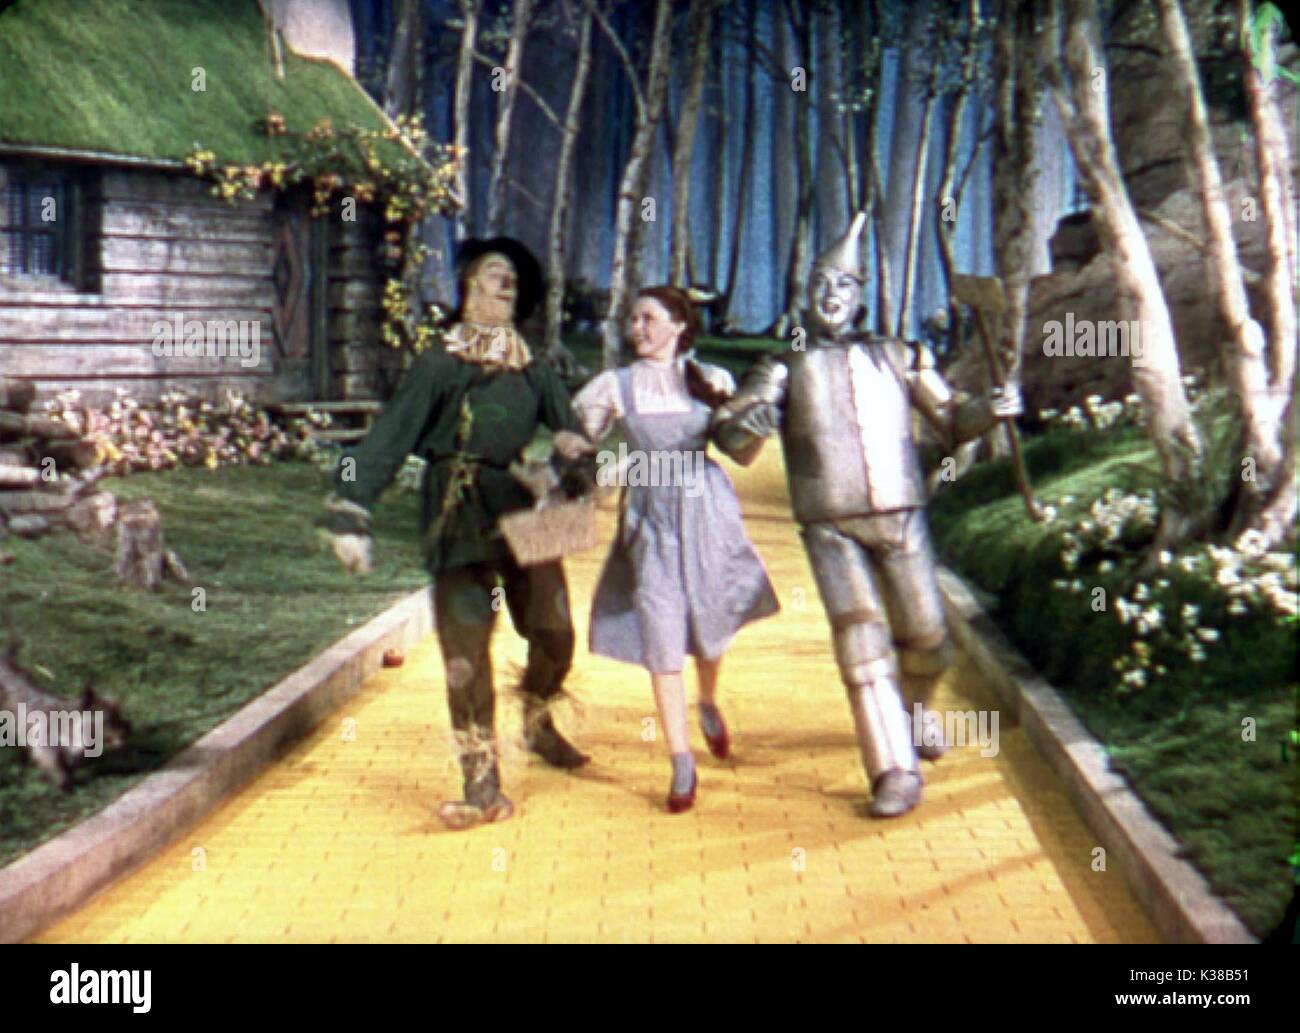 THE WIZARD OF OZ RAY BOLGER as the Scarecrow, JUDY GARLAND as Dorothy, JACK HALEY as the Tin Man THE WIZARD OF OZ     Date: 1939 Stock Photo